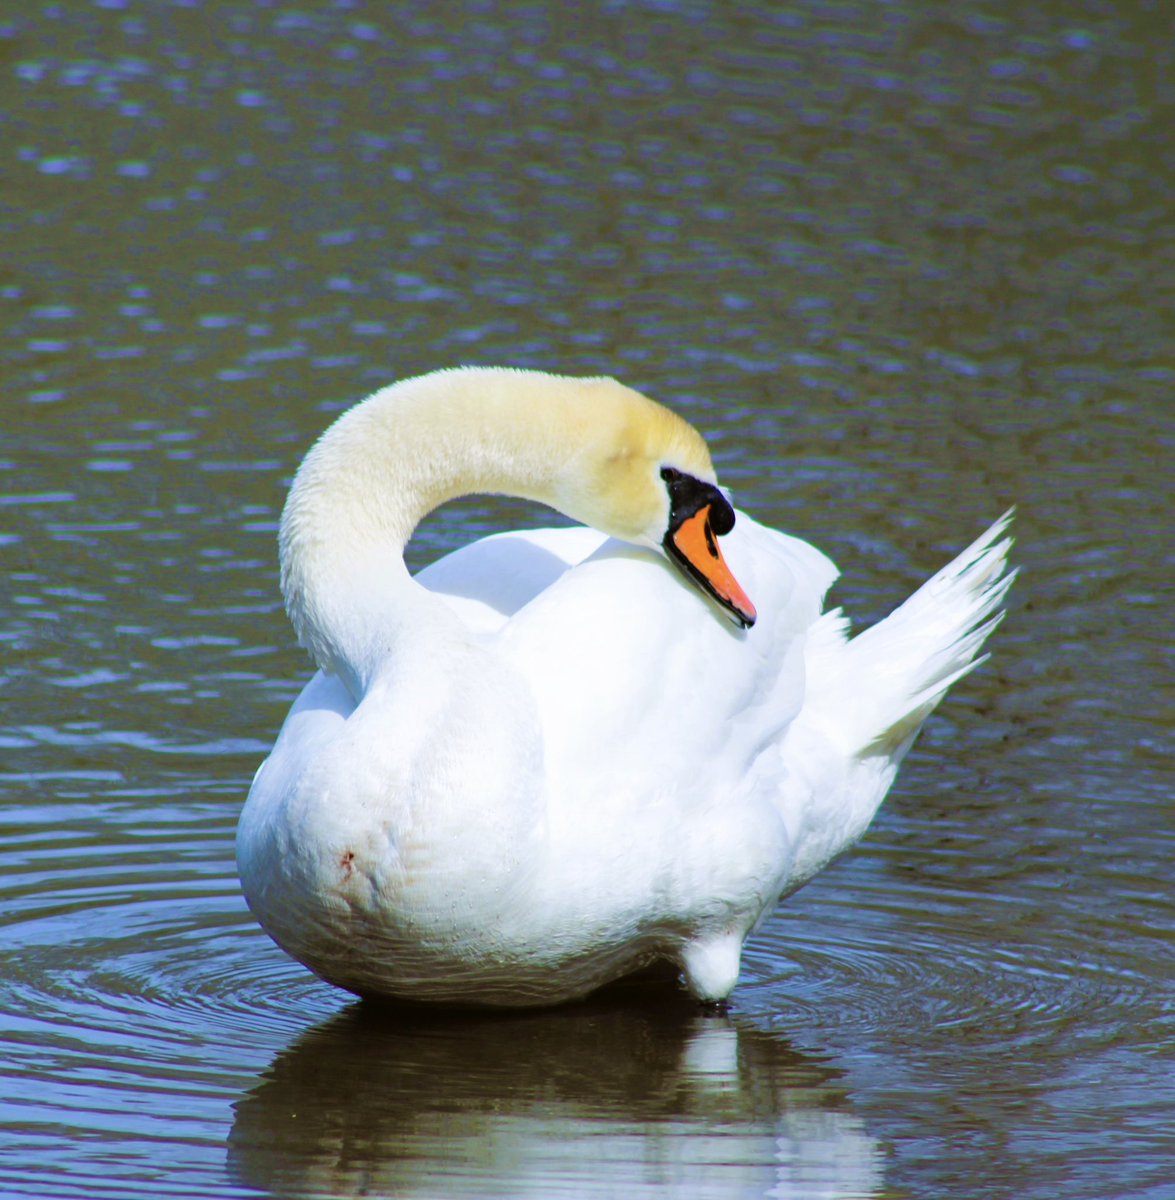 #swanday  Have a Great One!